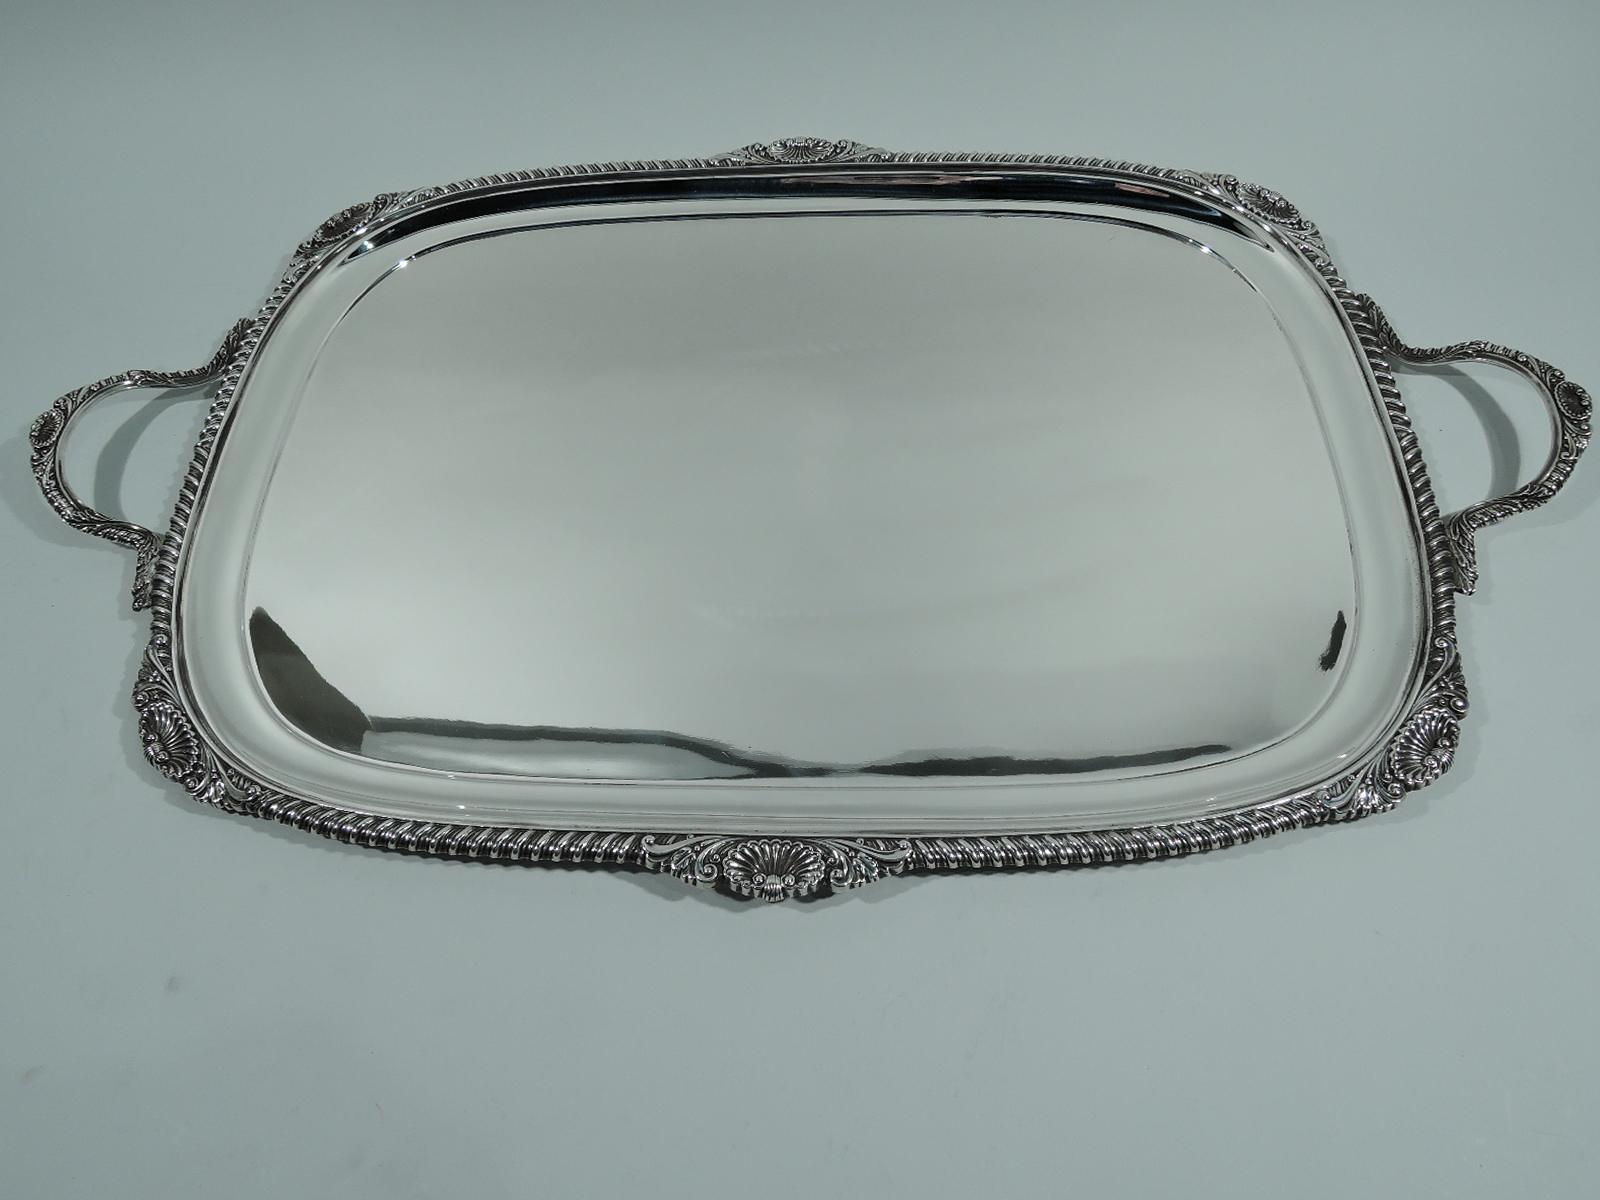 George V sterling silver tea tray. Made by William Hutton & Sons, Ltd in Sheffield in 1912. Plain and rectangular well with curved shoulder. Gadrooned rim interspersed with shells and leaves. C-scroll end handles same. Traditional and capacious with